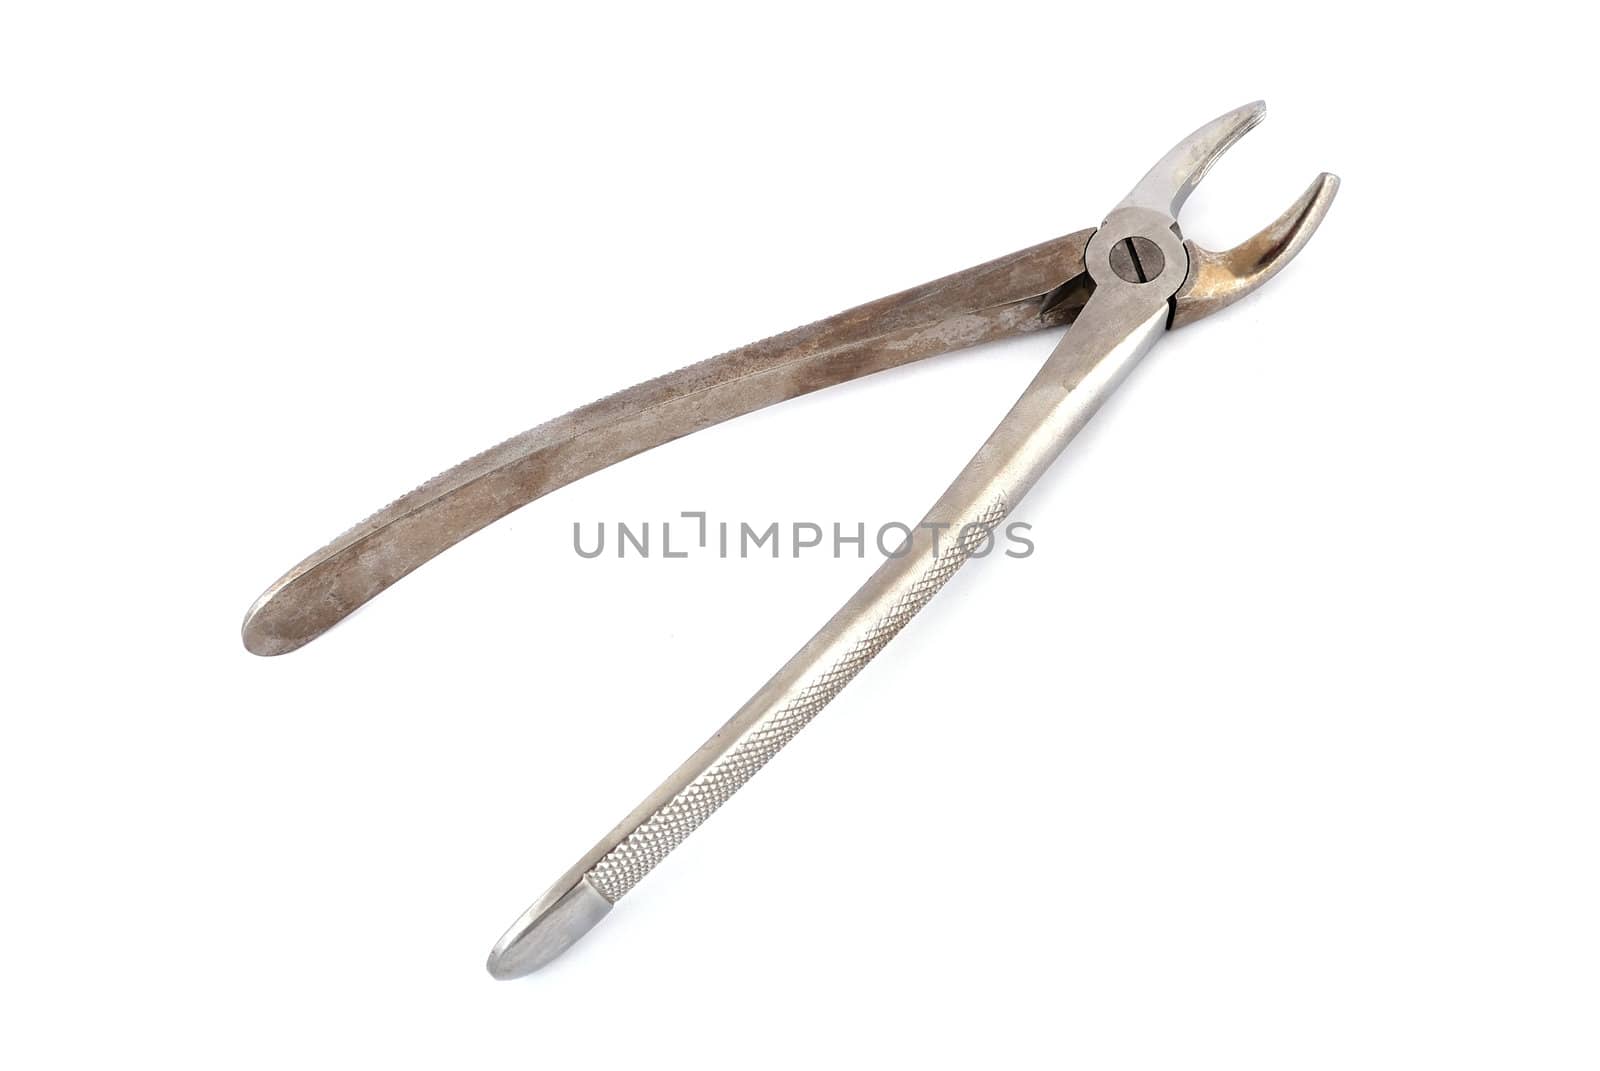 old dental pliers on a white background